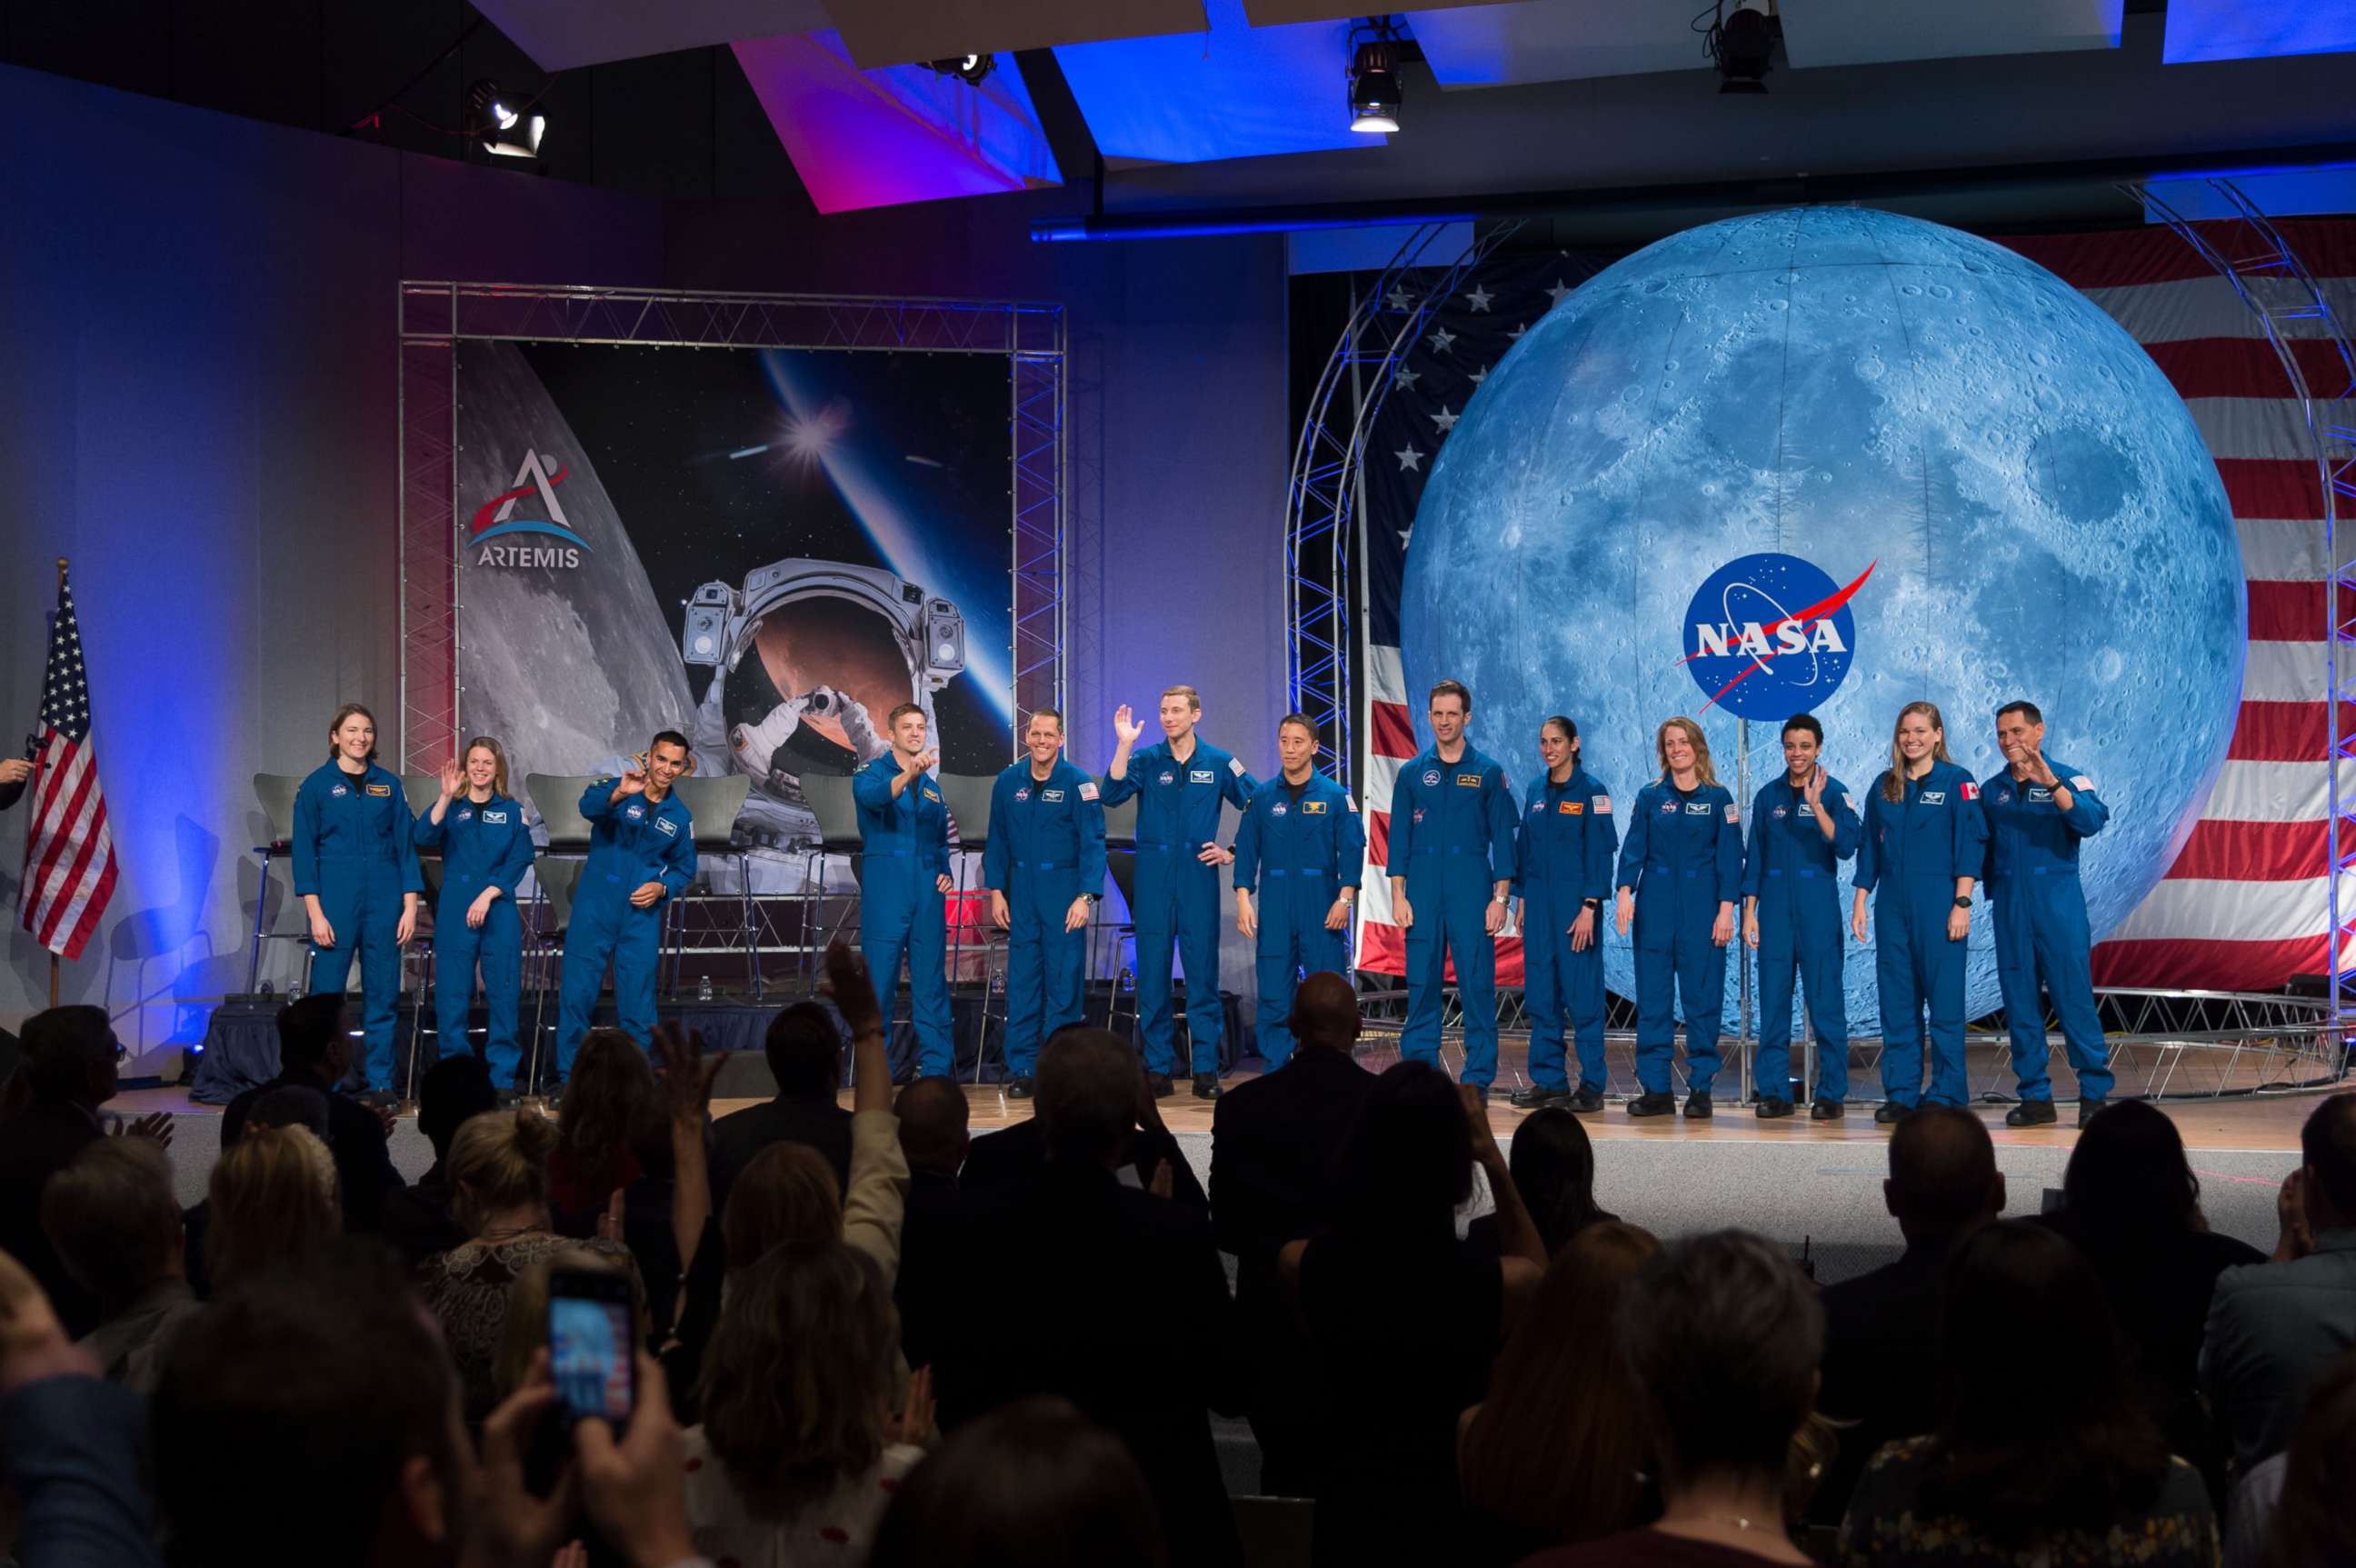 PHOTO: NASA and Canadian Space Agency (CSA) astronauts acknowledge the audience during a graduation ceremony at Johnson Space Center in Houston, Jan. 10, 2020.